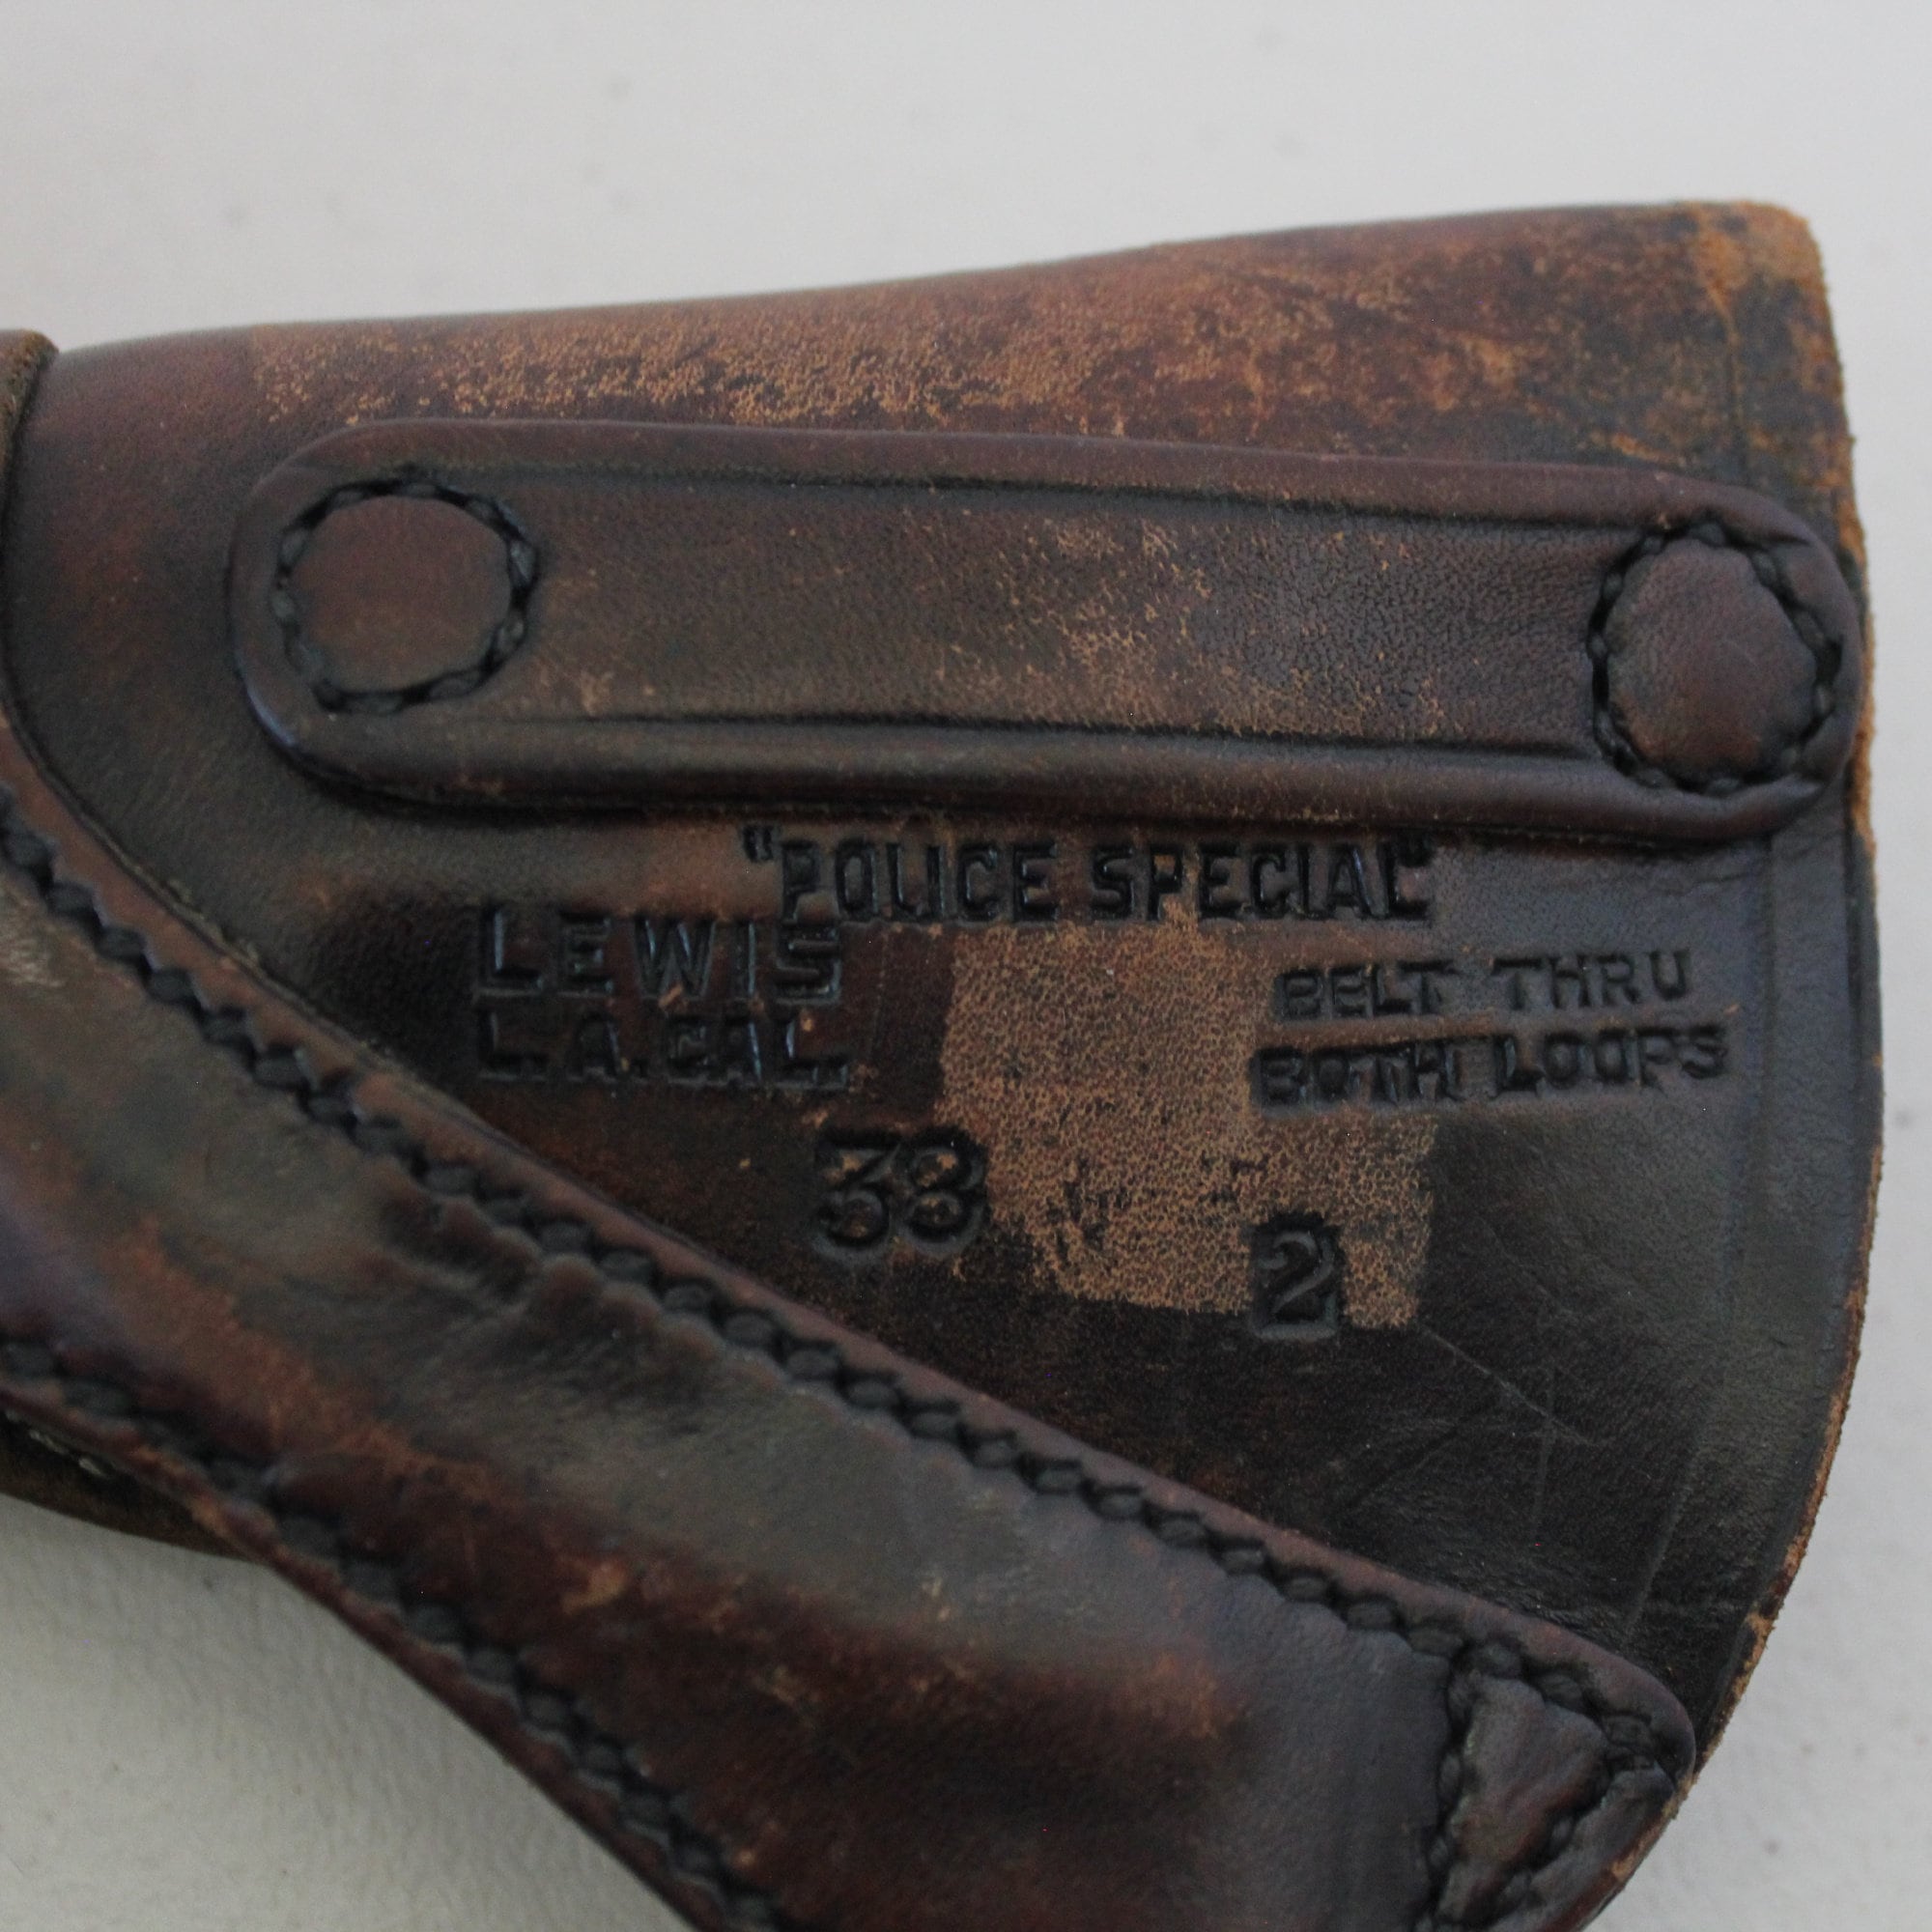 Vintage Rare L.A. CAL Lewis 38 2 Police Special Holster, Tooled Leather ...